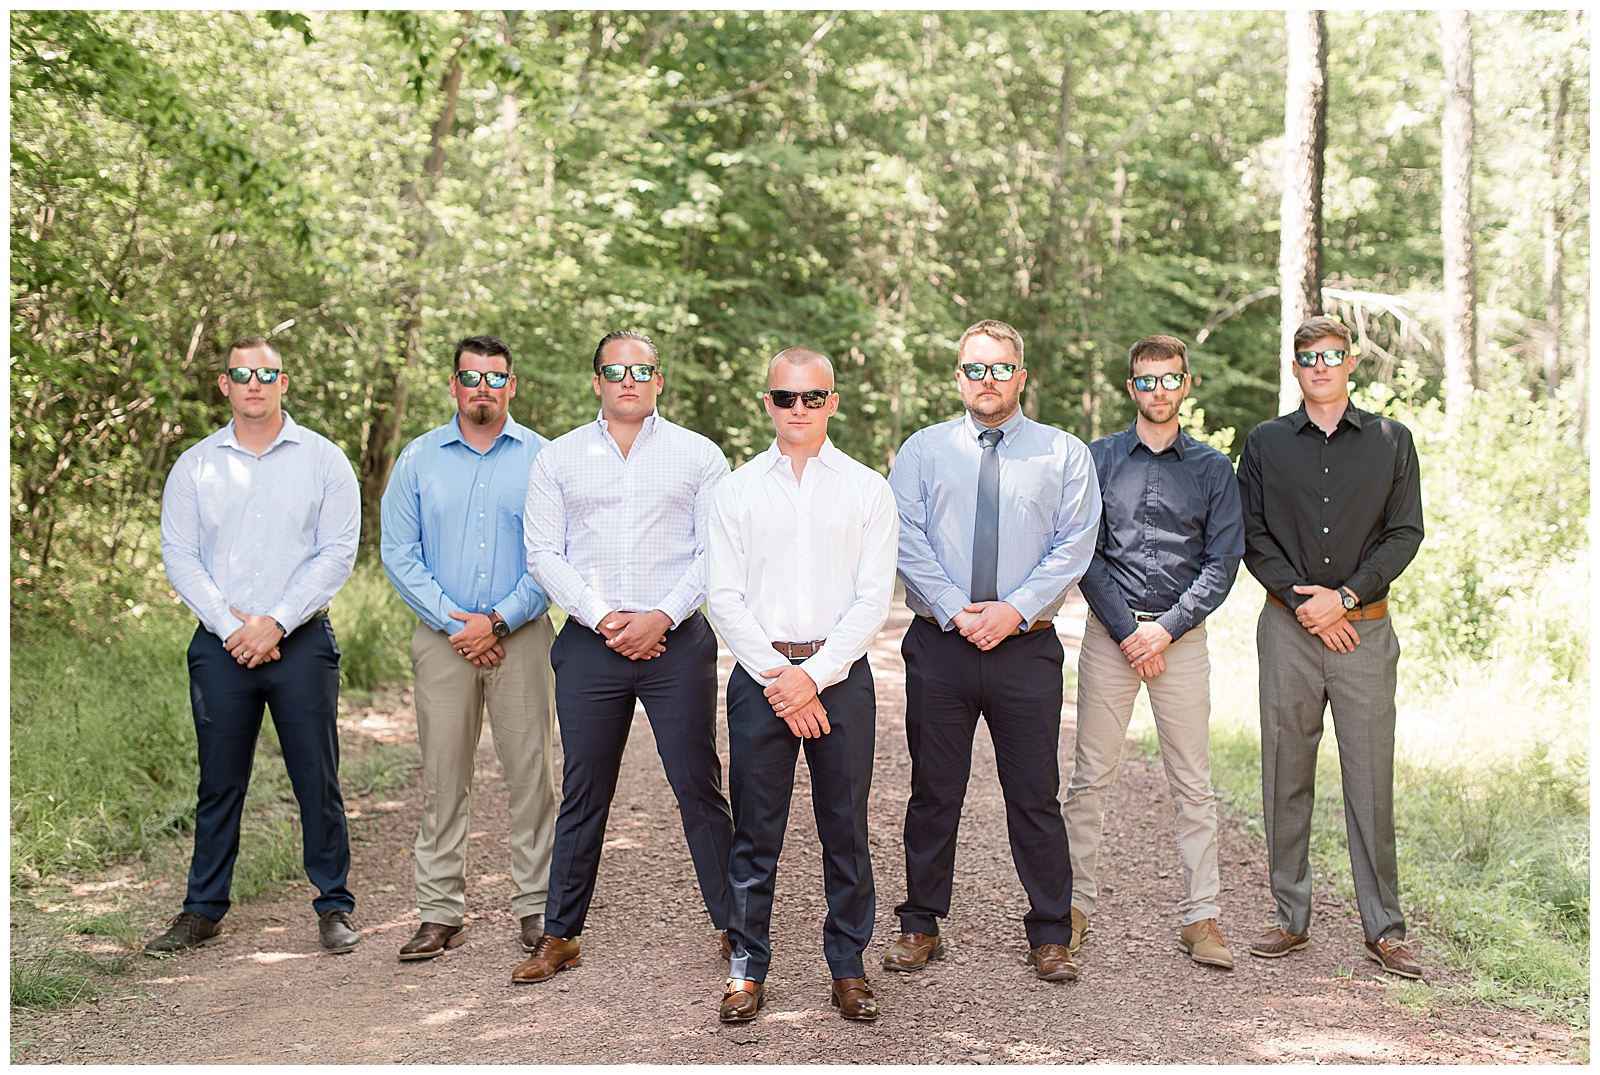 groomsmen all wearing sunglasses staring at camera in a flying v formation